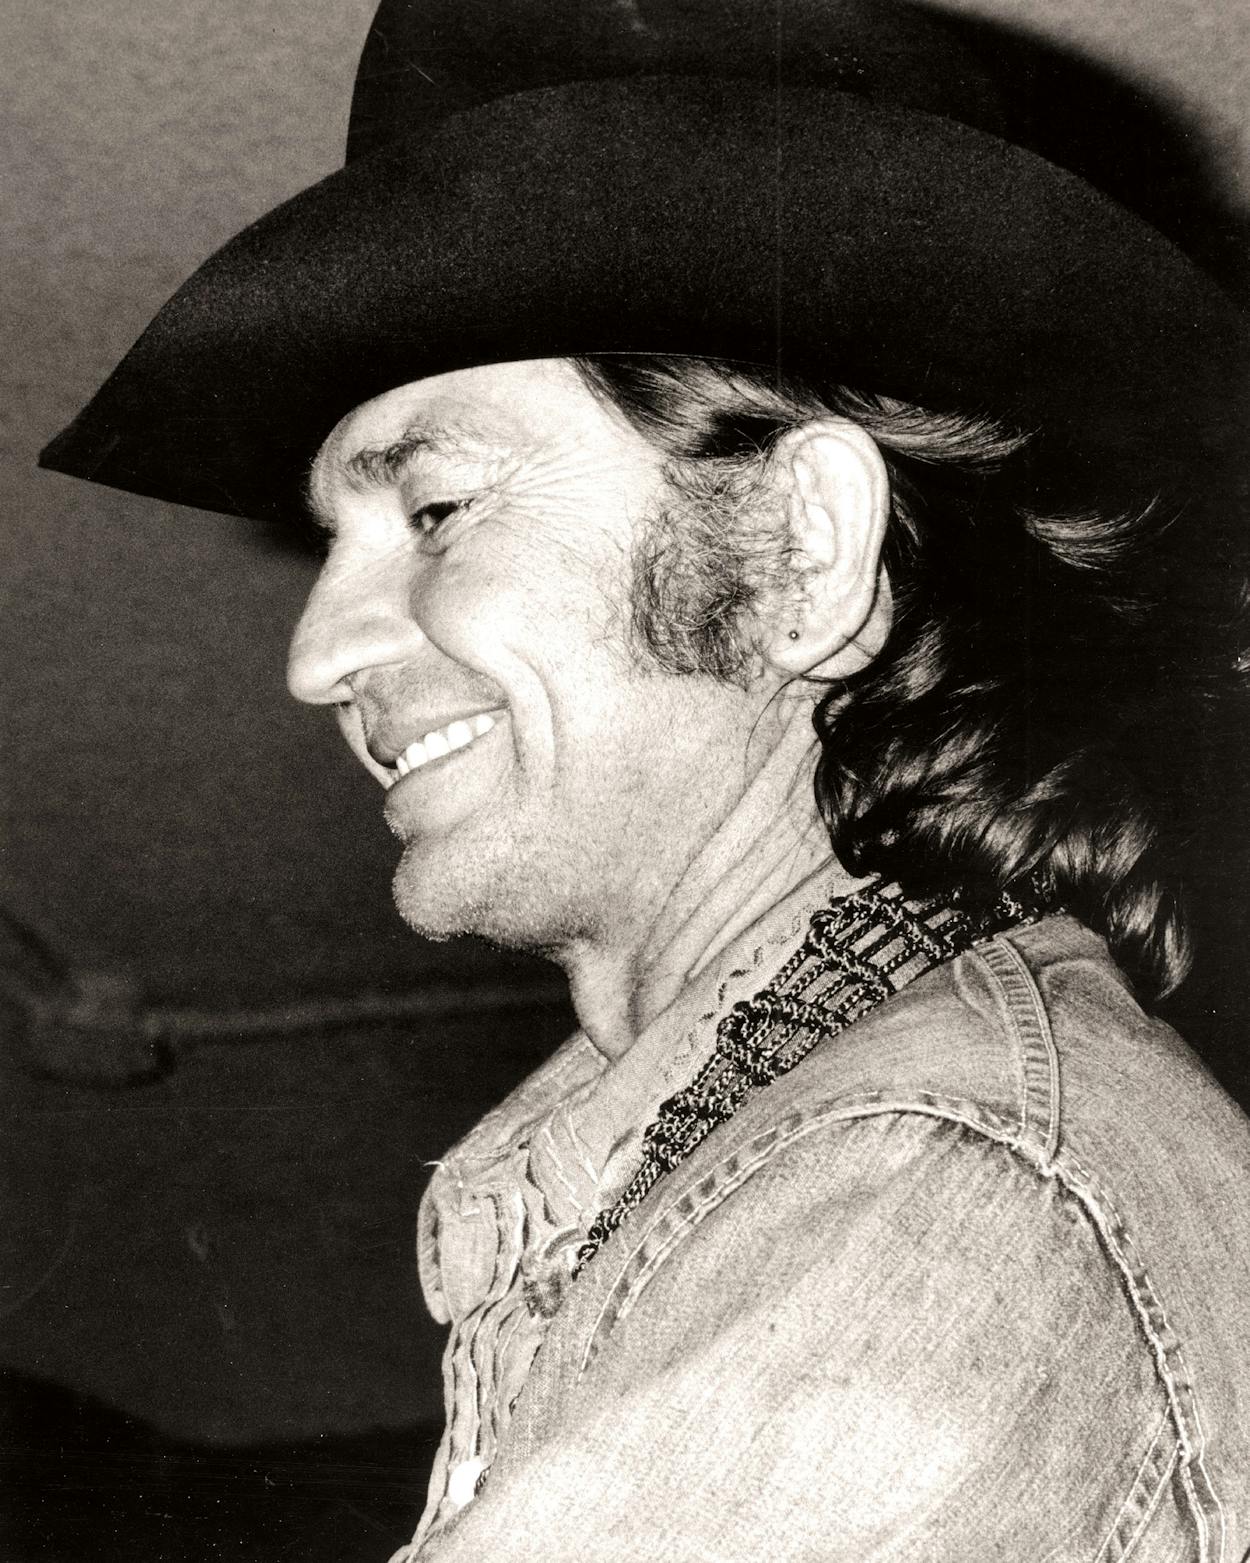 Country singer/songwriter Willie Nelson performs onstage in circa 1974.